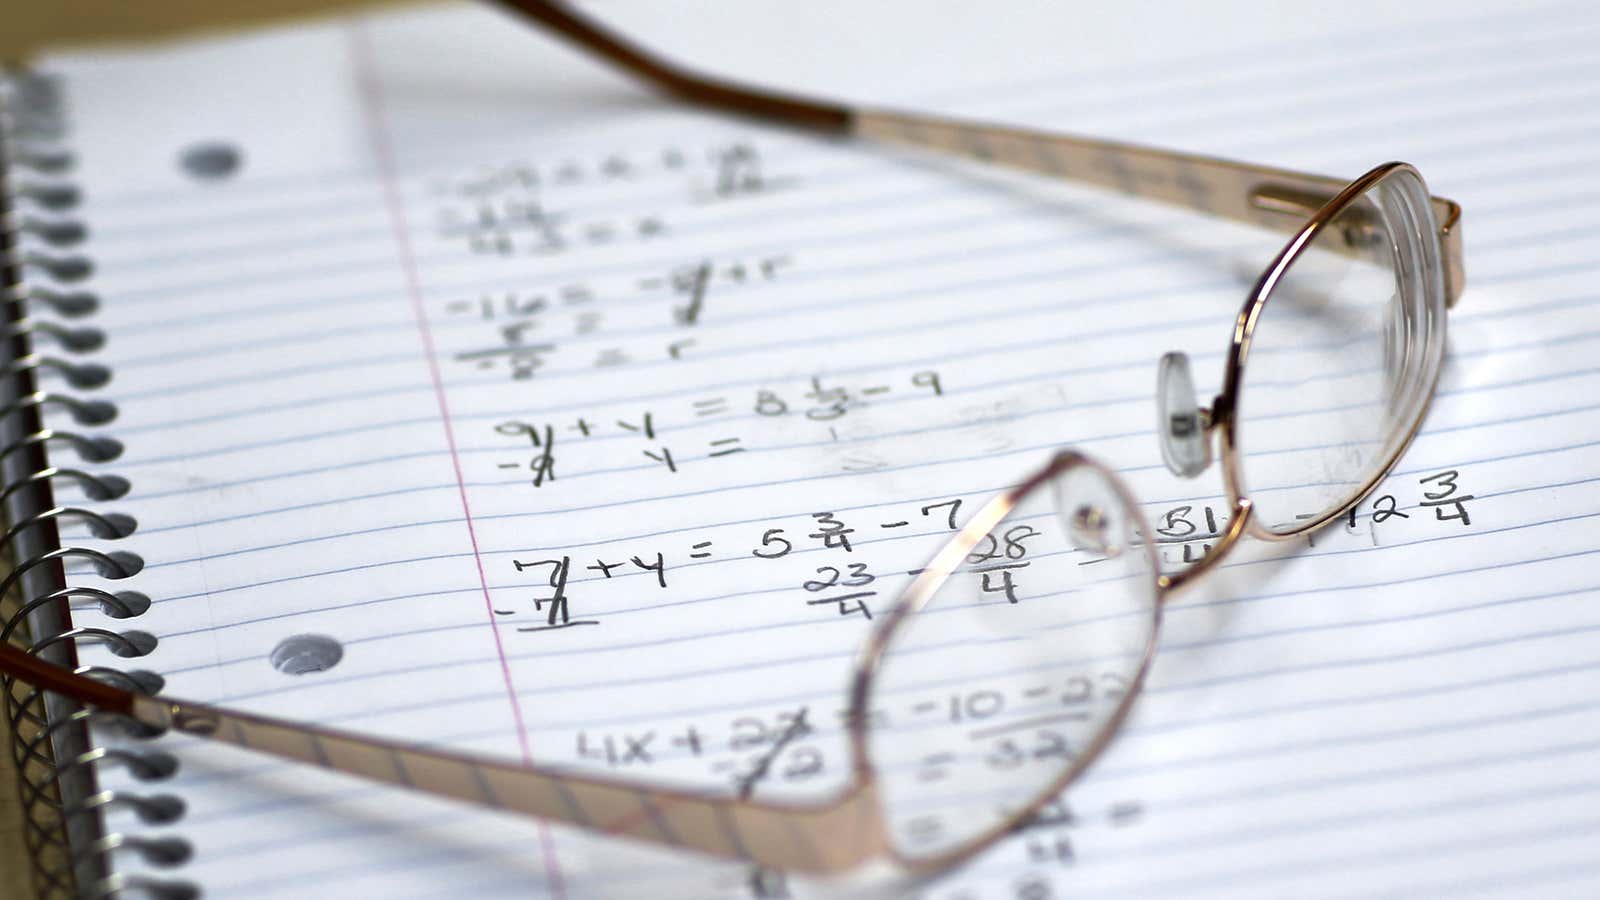 American millennials might benefit from some extra math classes.